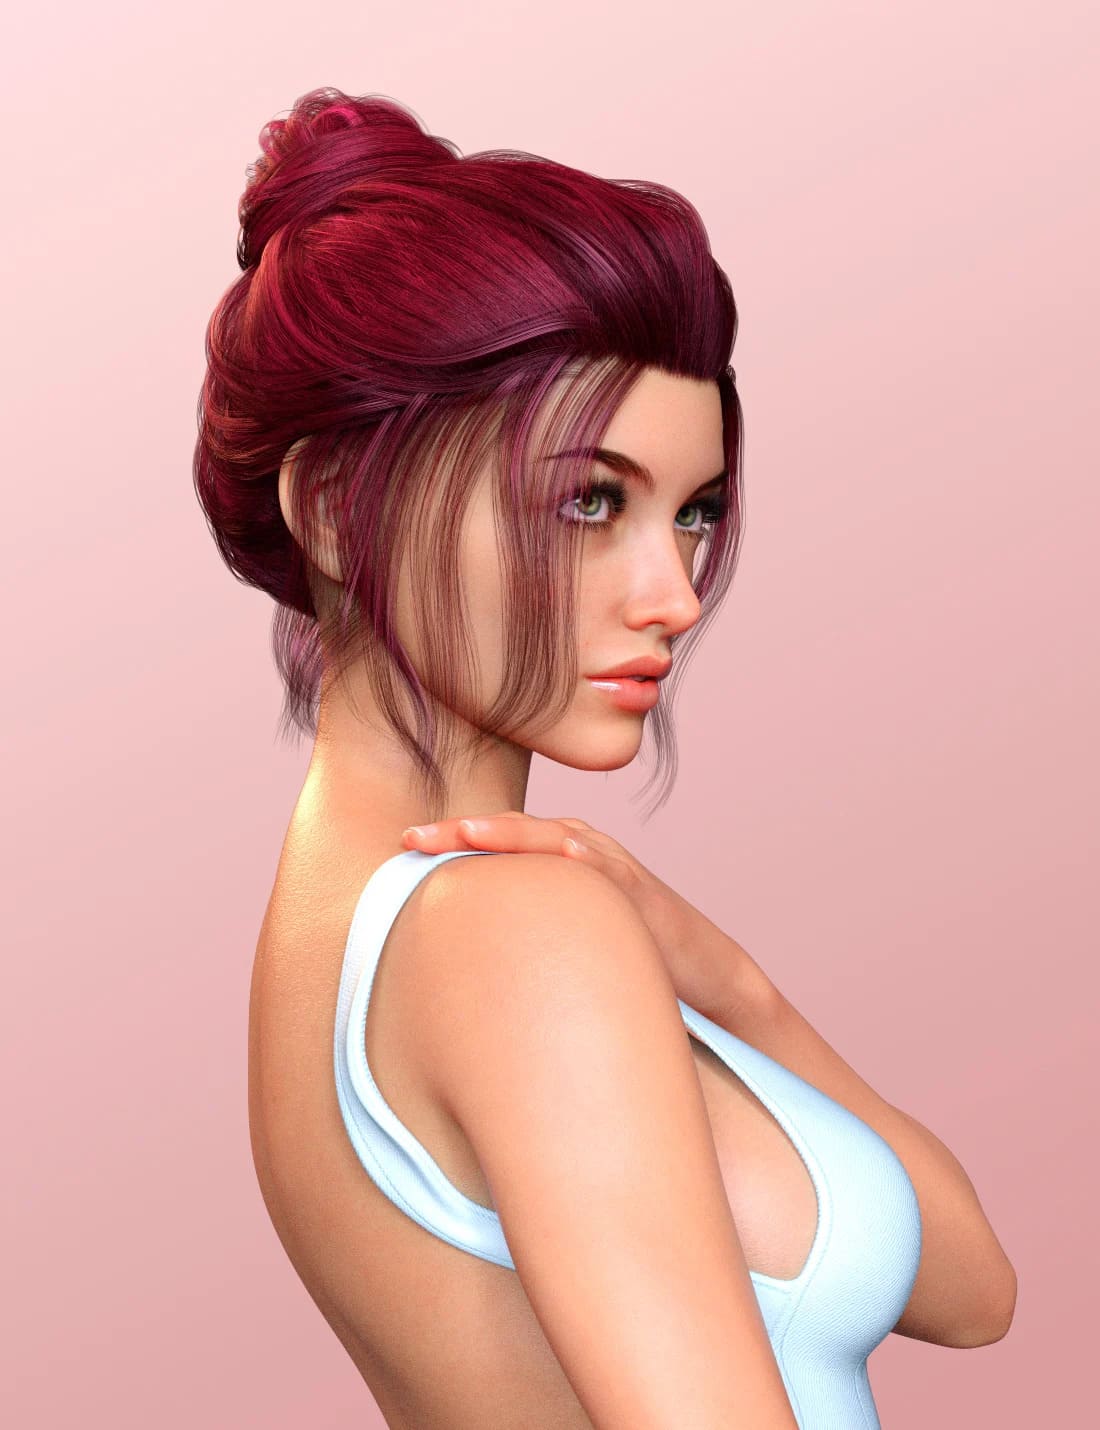 Magical Arts Updo Hairstyle for Genesis 8.1 Females_DAZ3D下载站